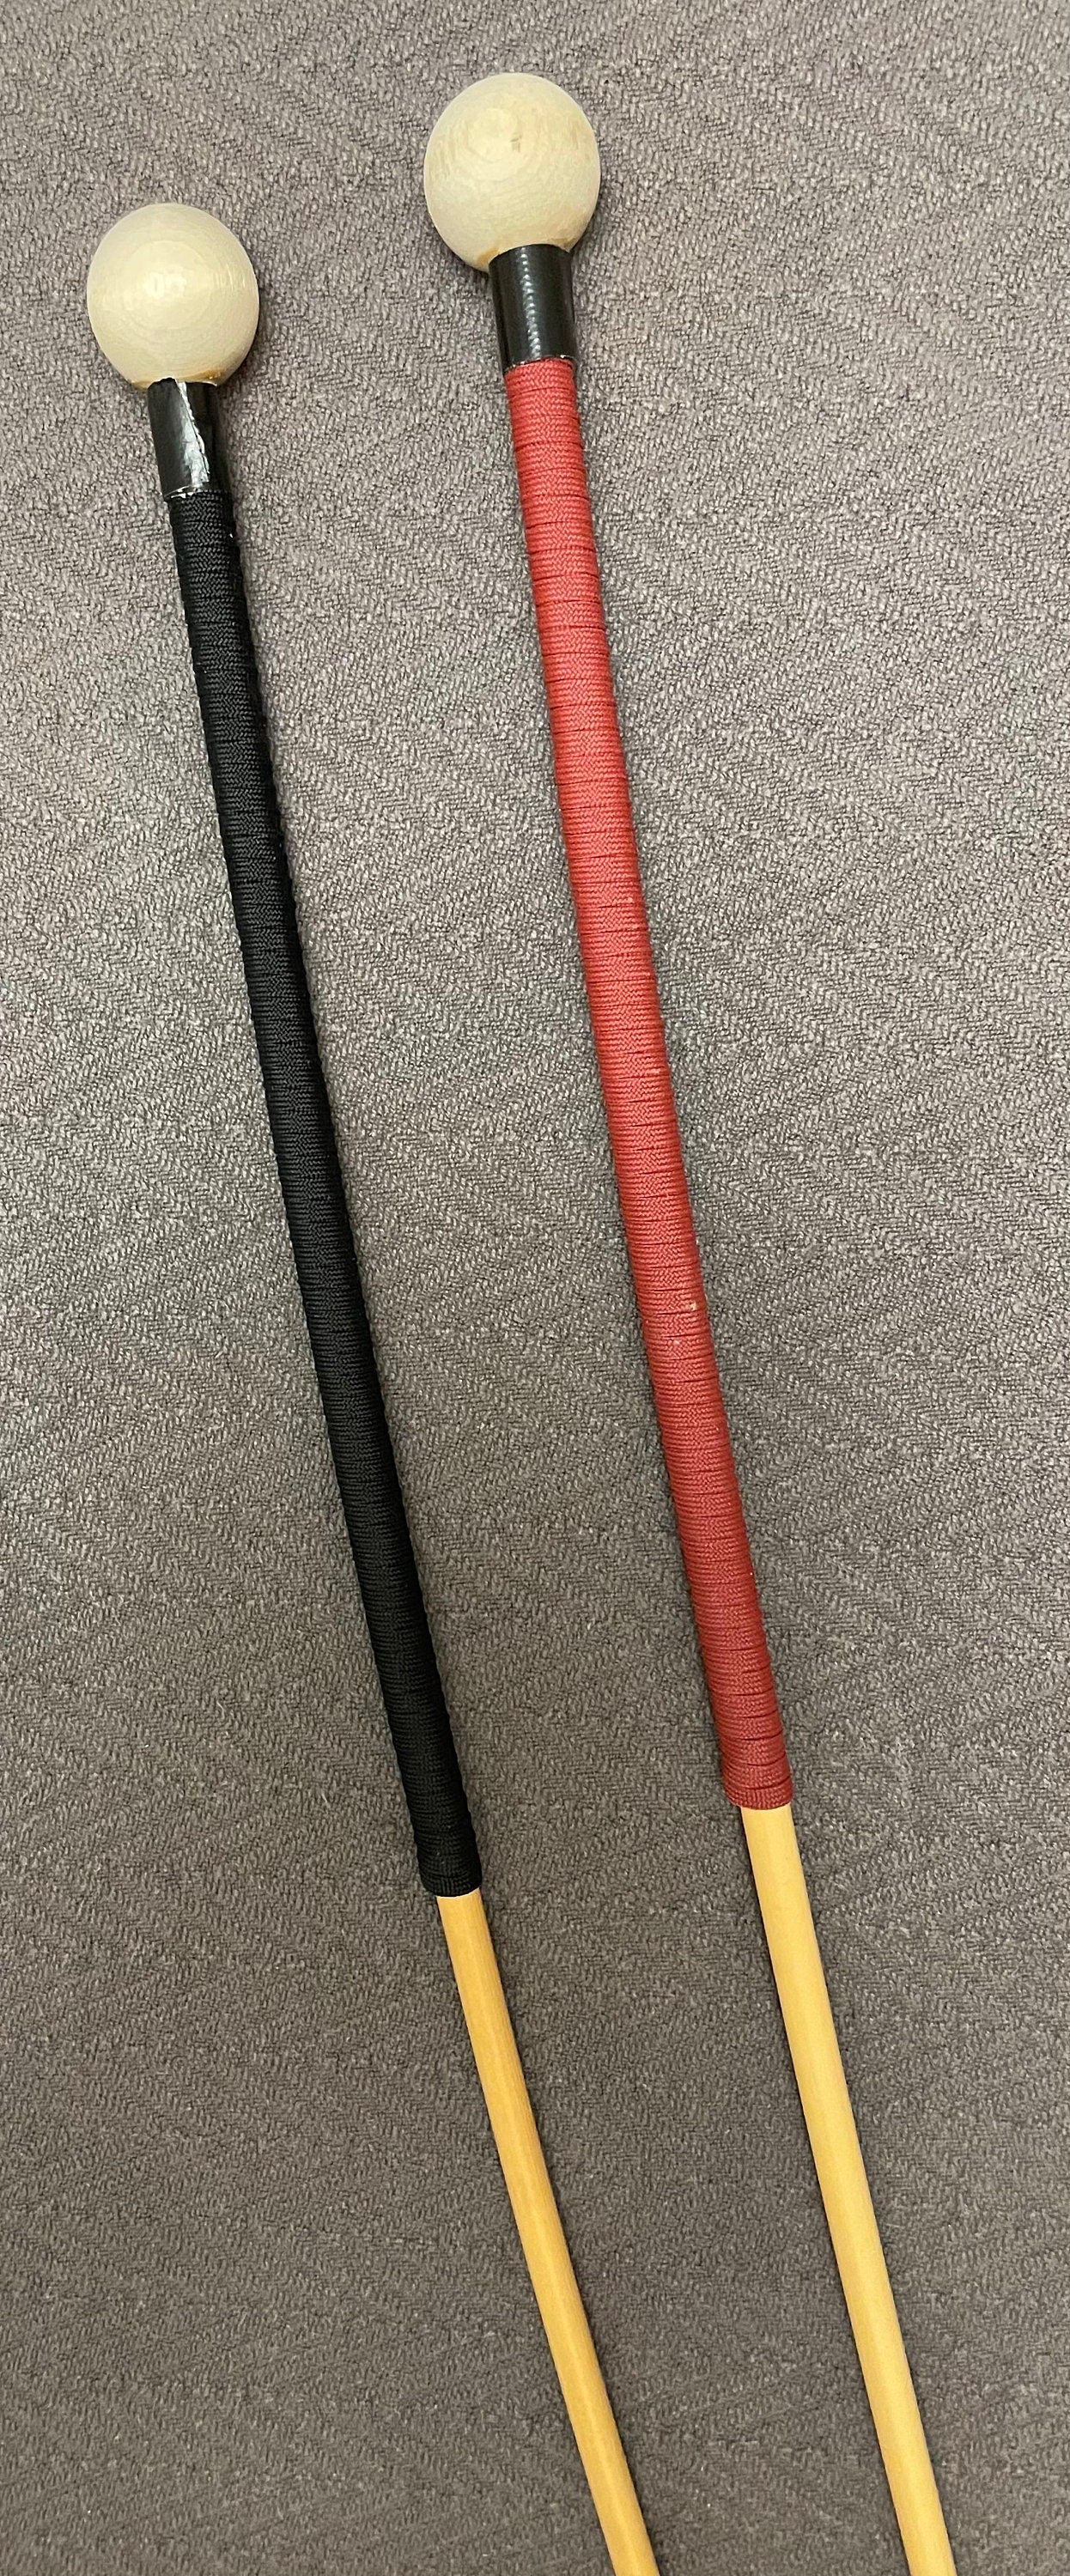 The Sultana Classic Dragon Rattan Punishment Cane  with Black and Red Kangaroo Leather Handles - Englishvice Canes